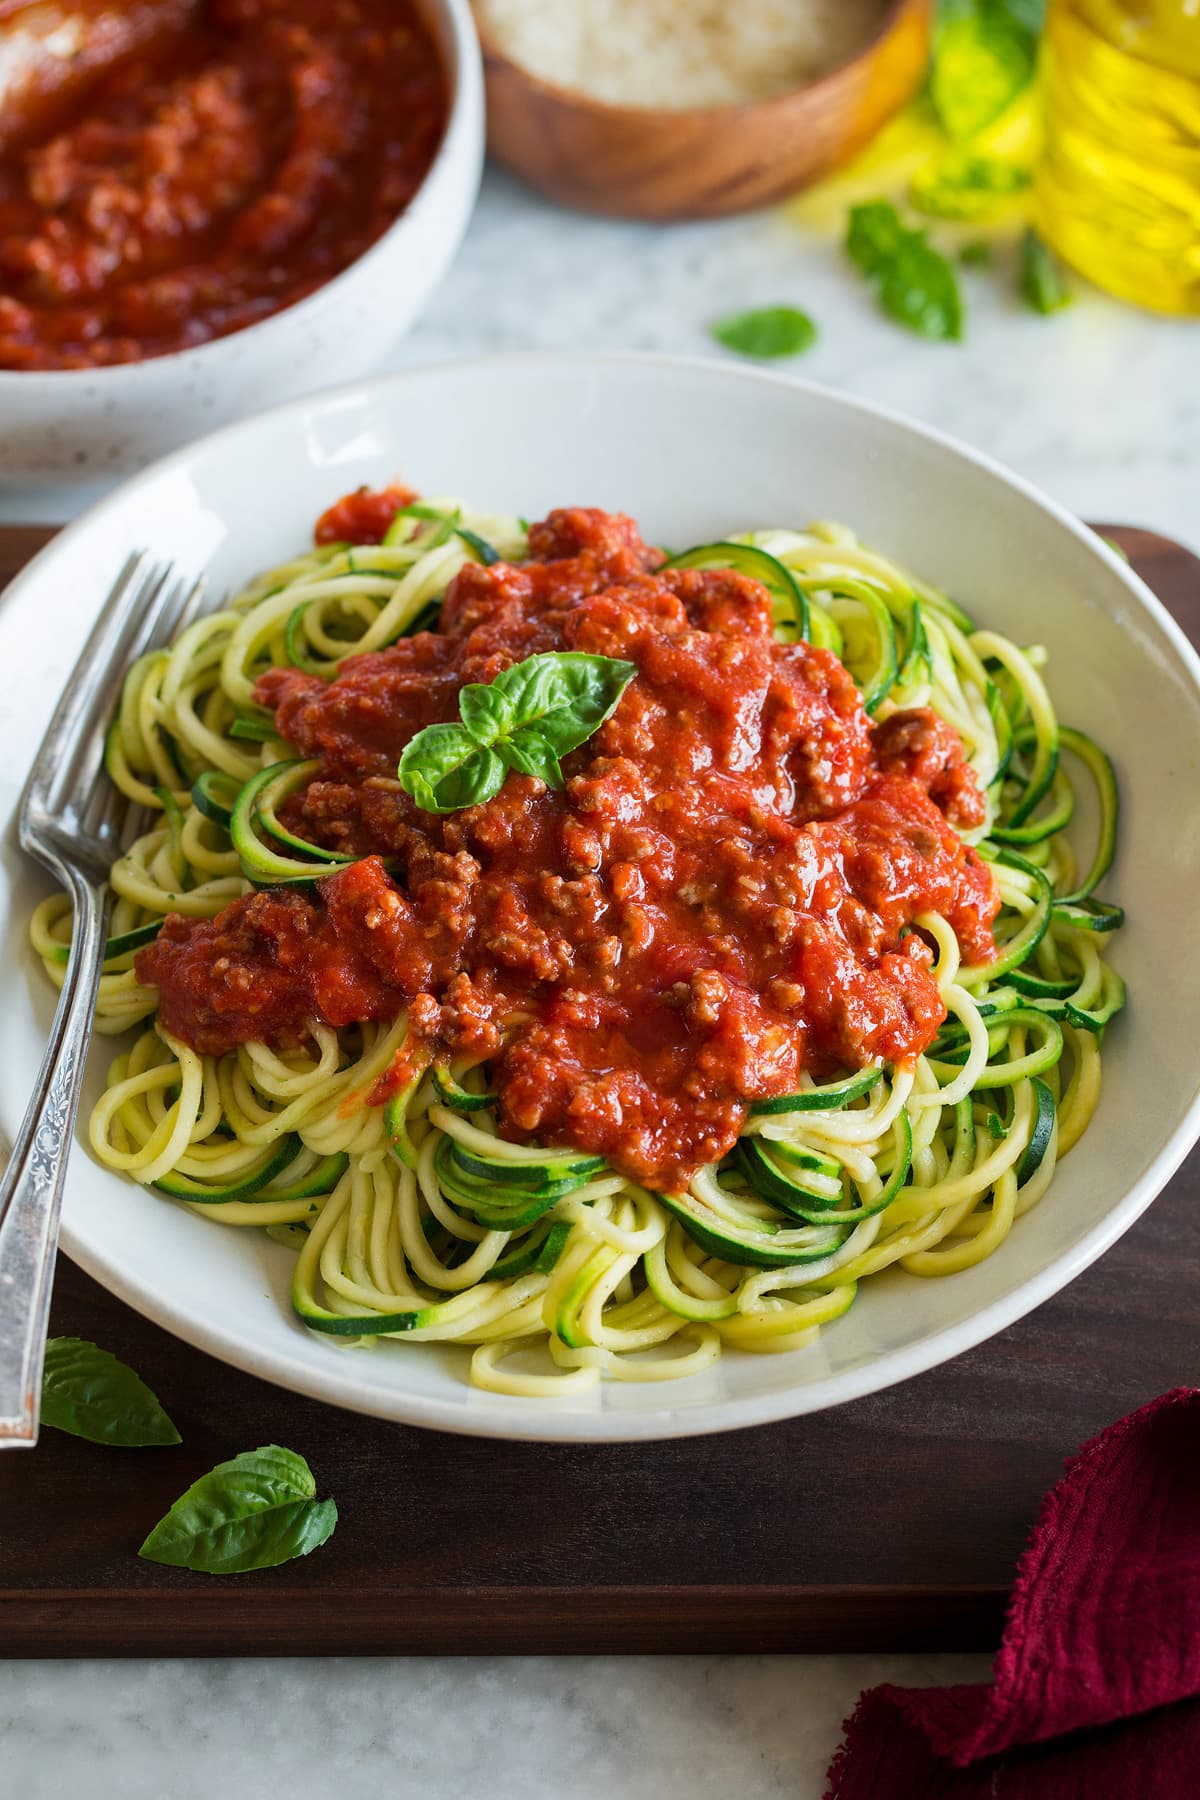 Zucchini Noodles shown topped with a beefy spaghetti sauce.